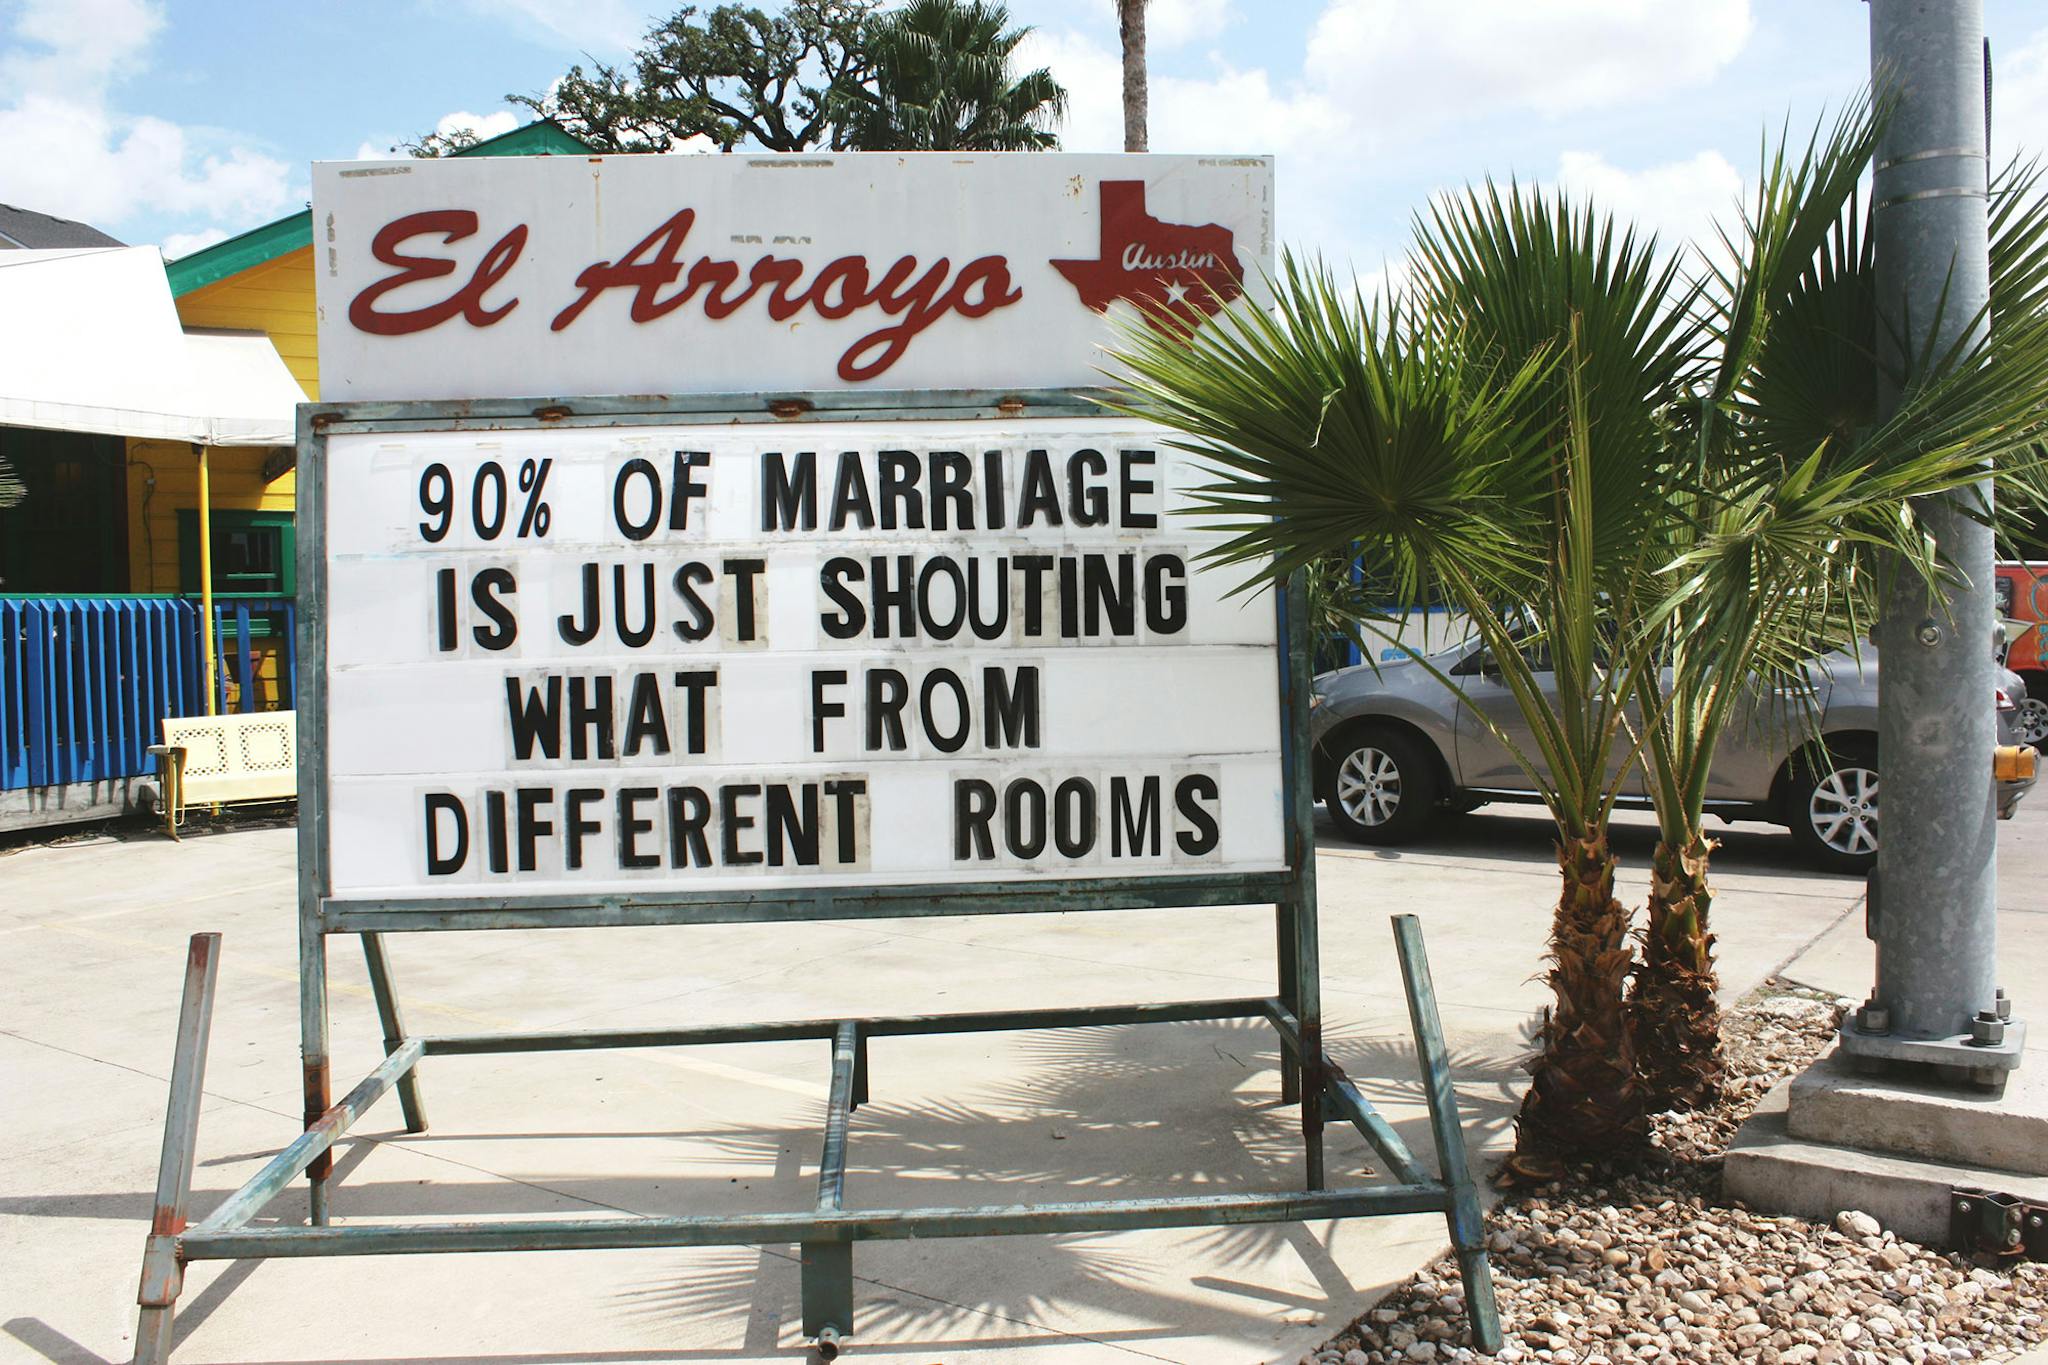 El Arroyo sign says 90% of marriage is just shouting "what" from different rooms.